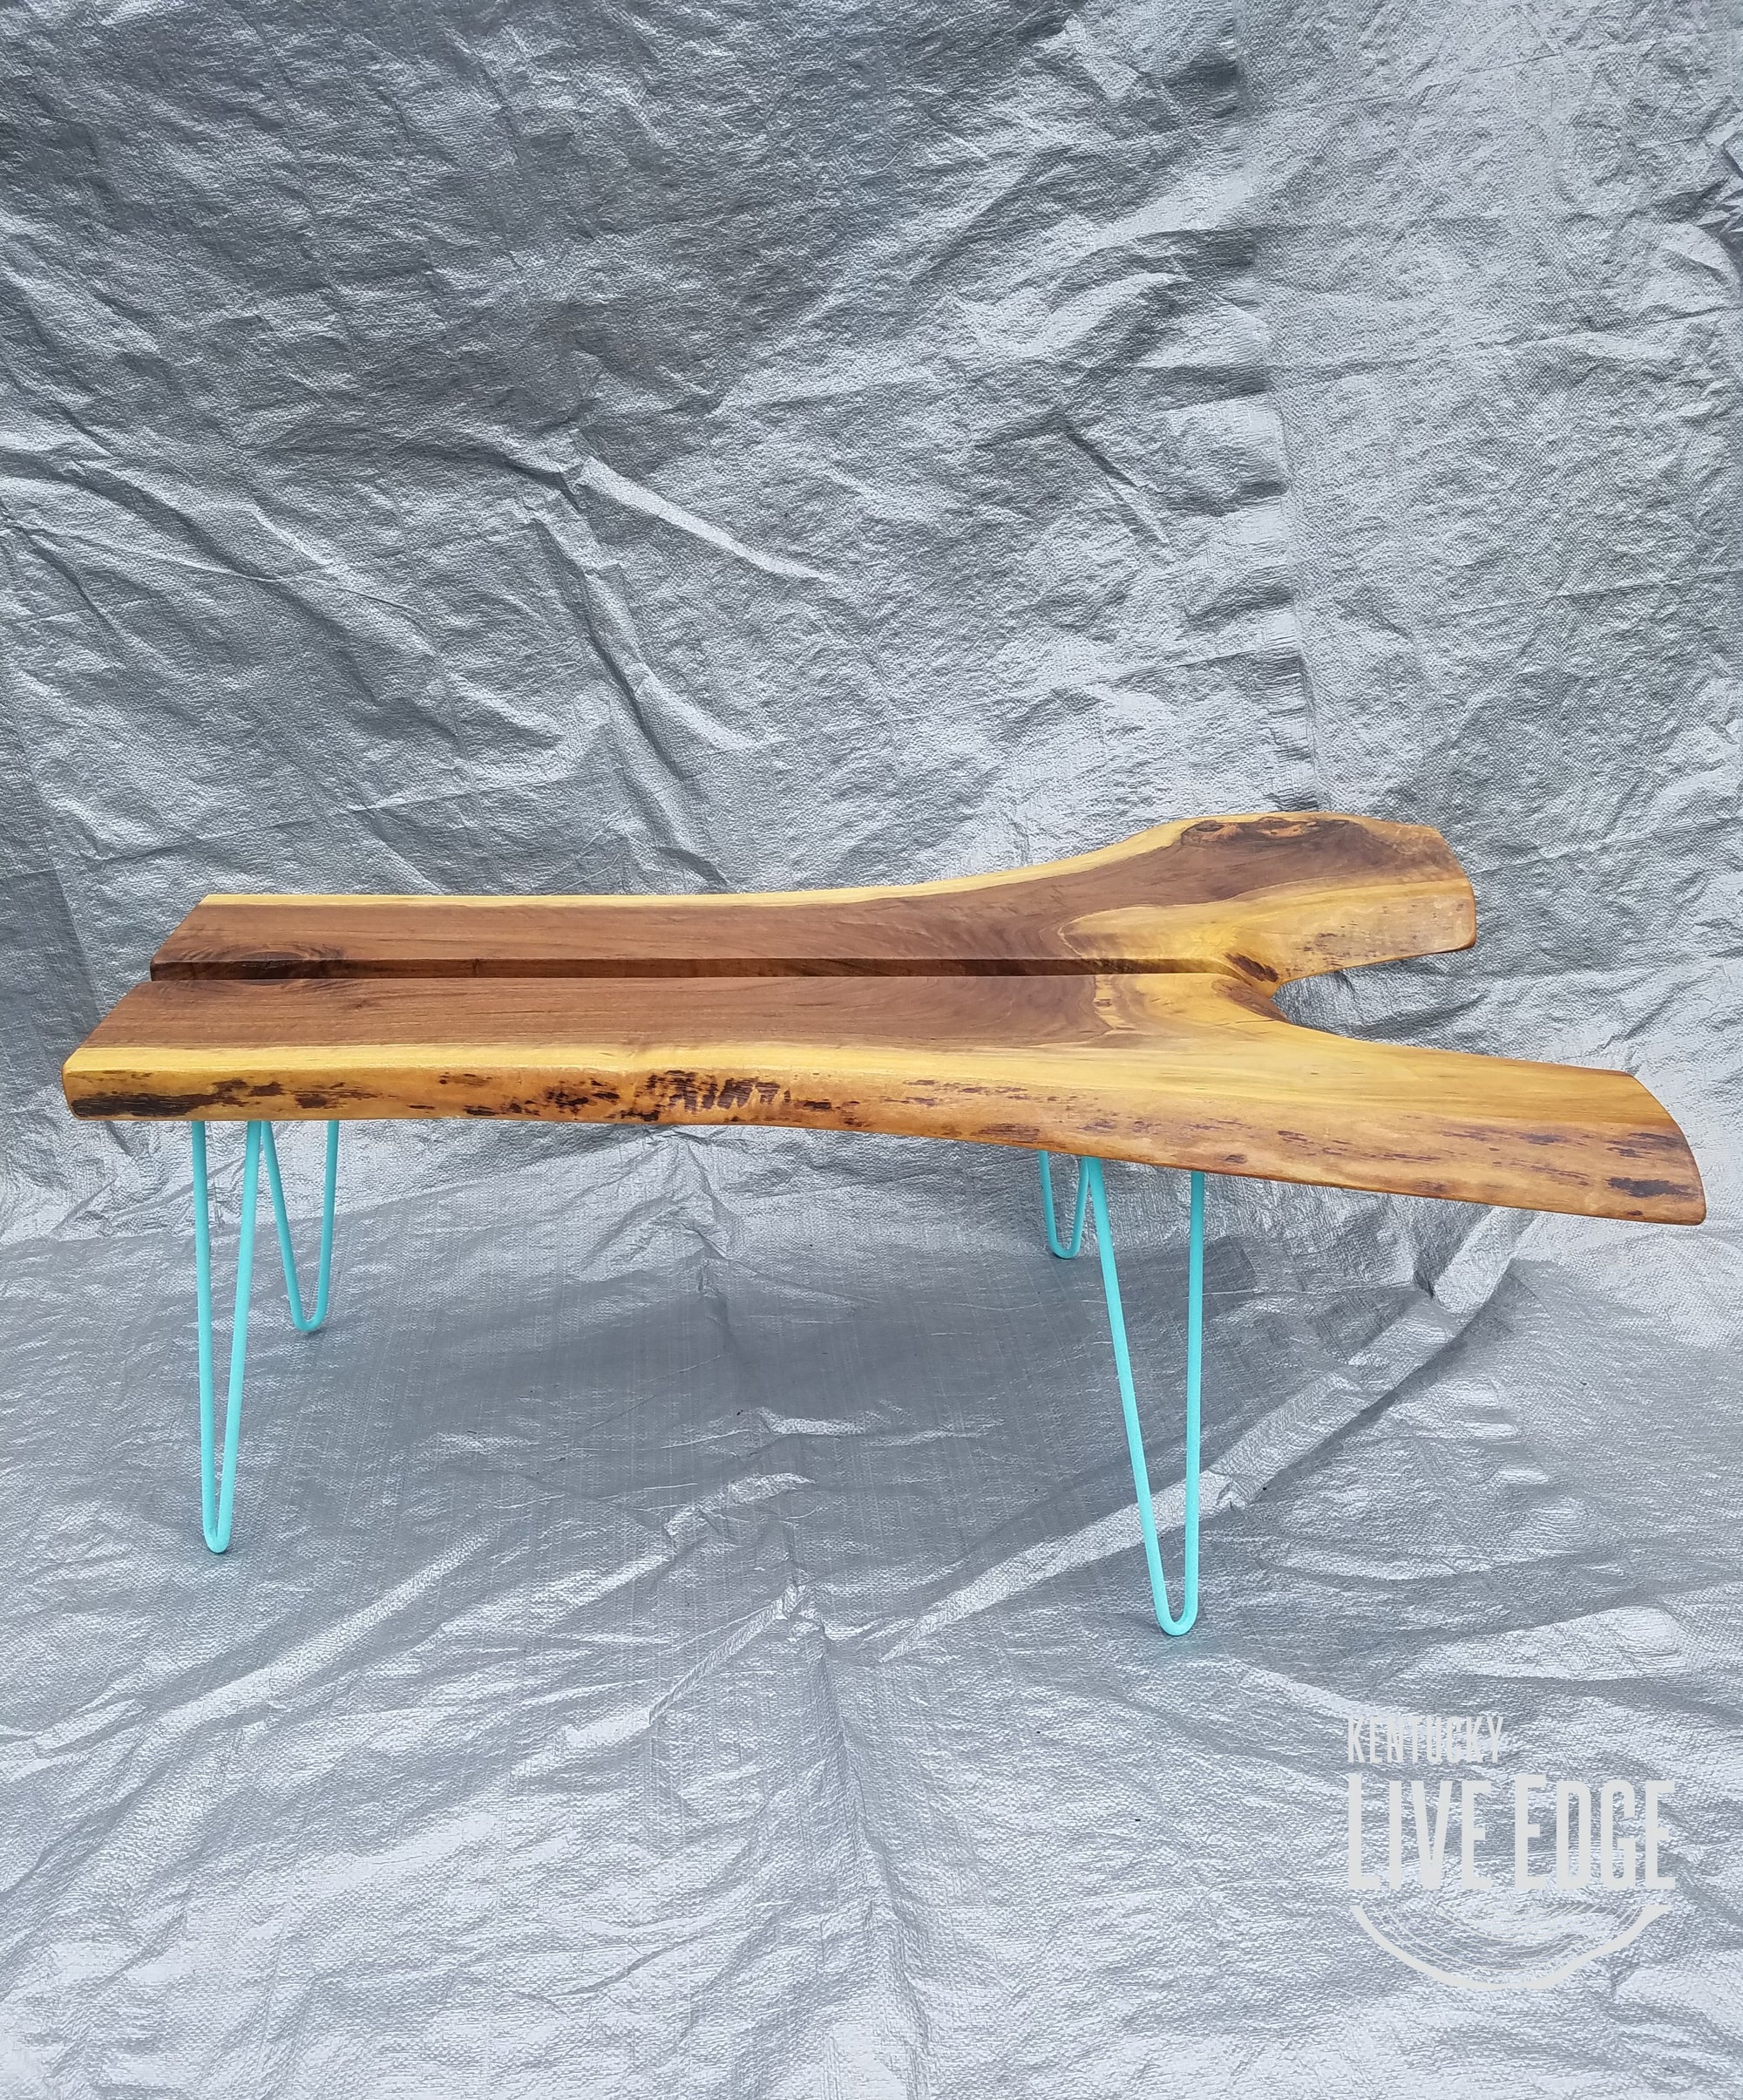 Teal Coffee Table- Live Edge- Turquoise- Mid Century- Organic- Modern- Rustic- Reclaimed- Furniture- Handmade- Living Room- Unique- Large